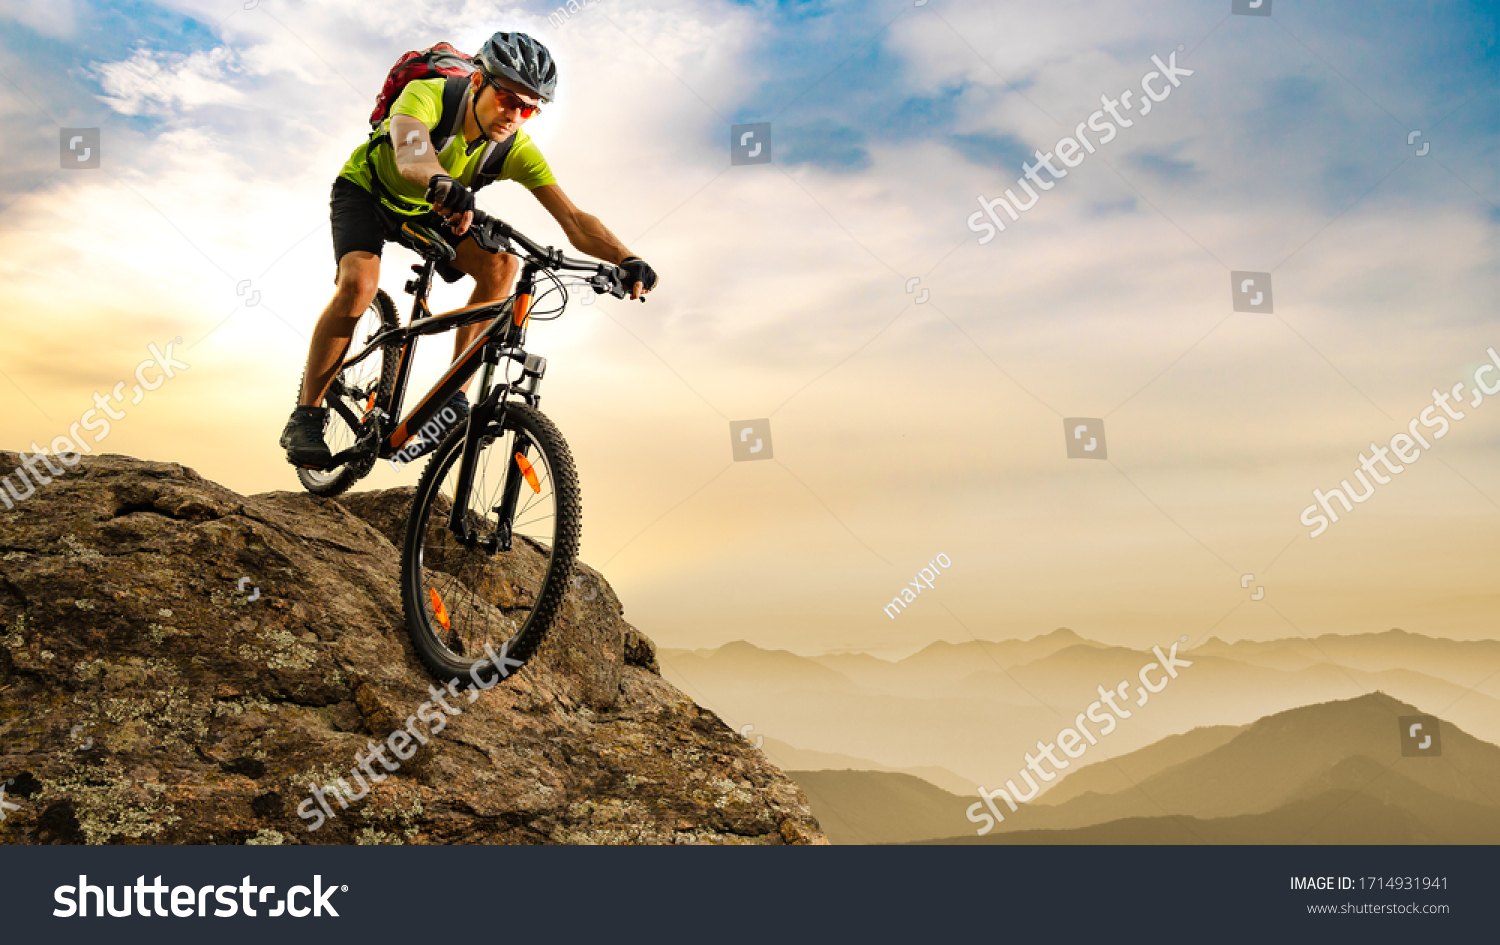 Cyclist Riding the Bike Down the Rock at Sunrise in the Beautiful Mountains on the Background. Extreme Sport and Enduro Biking Concept. #1714931941